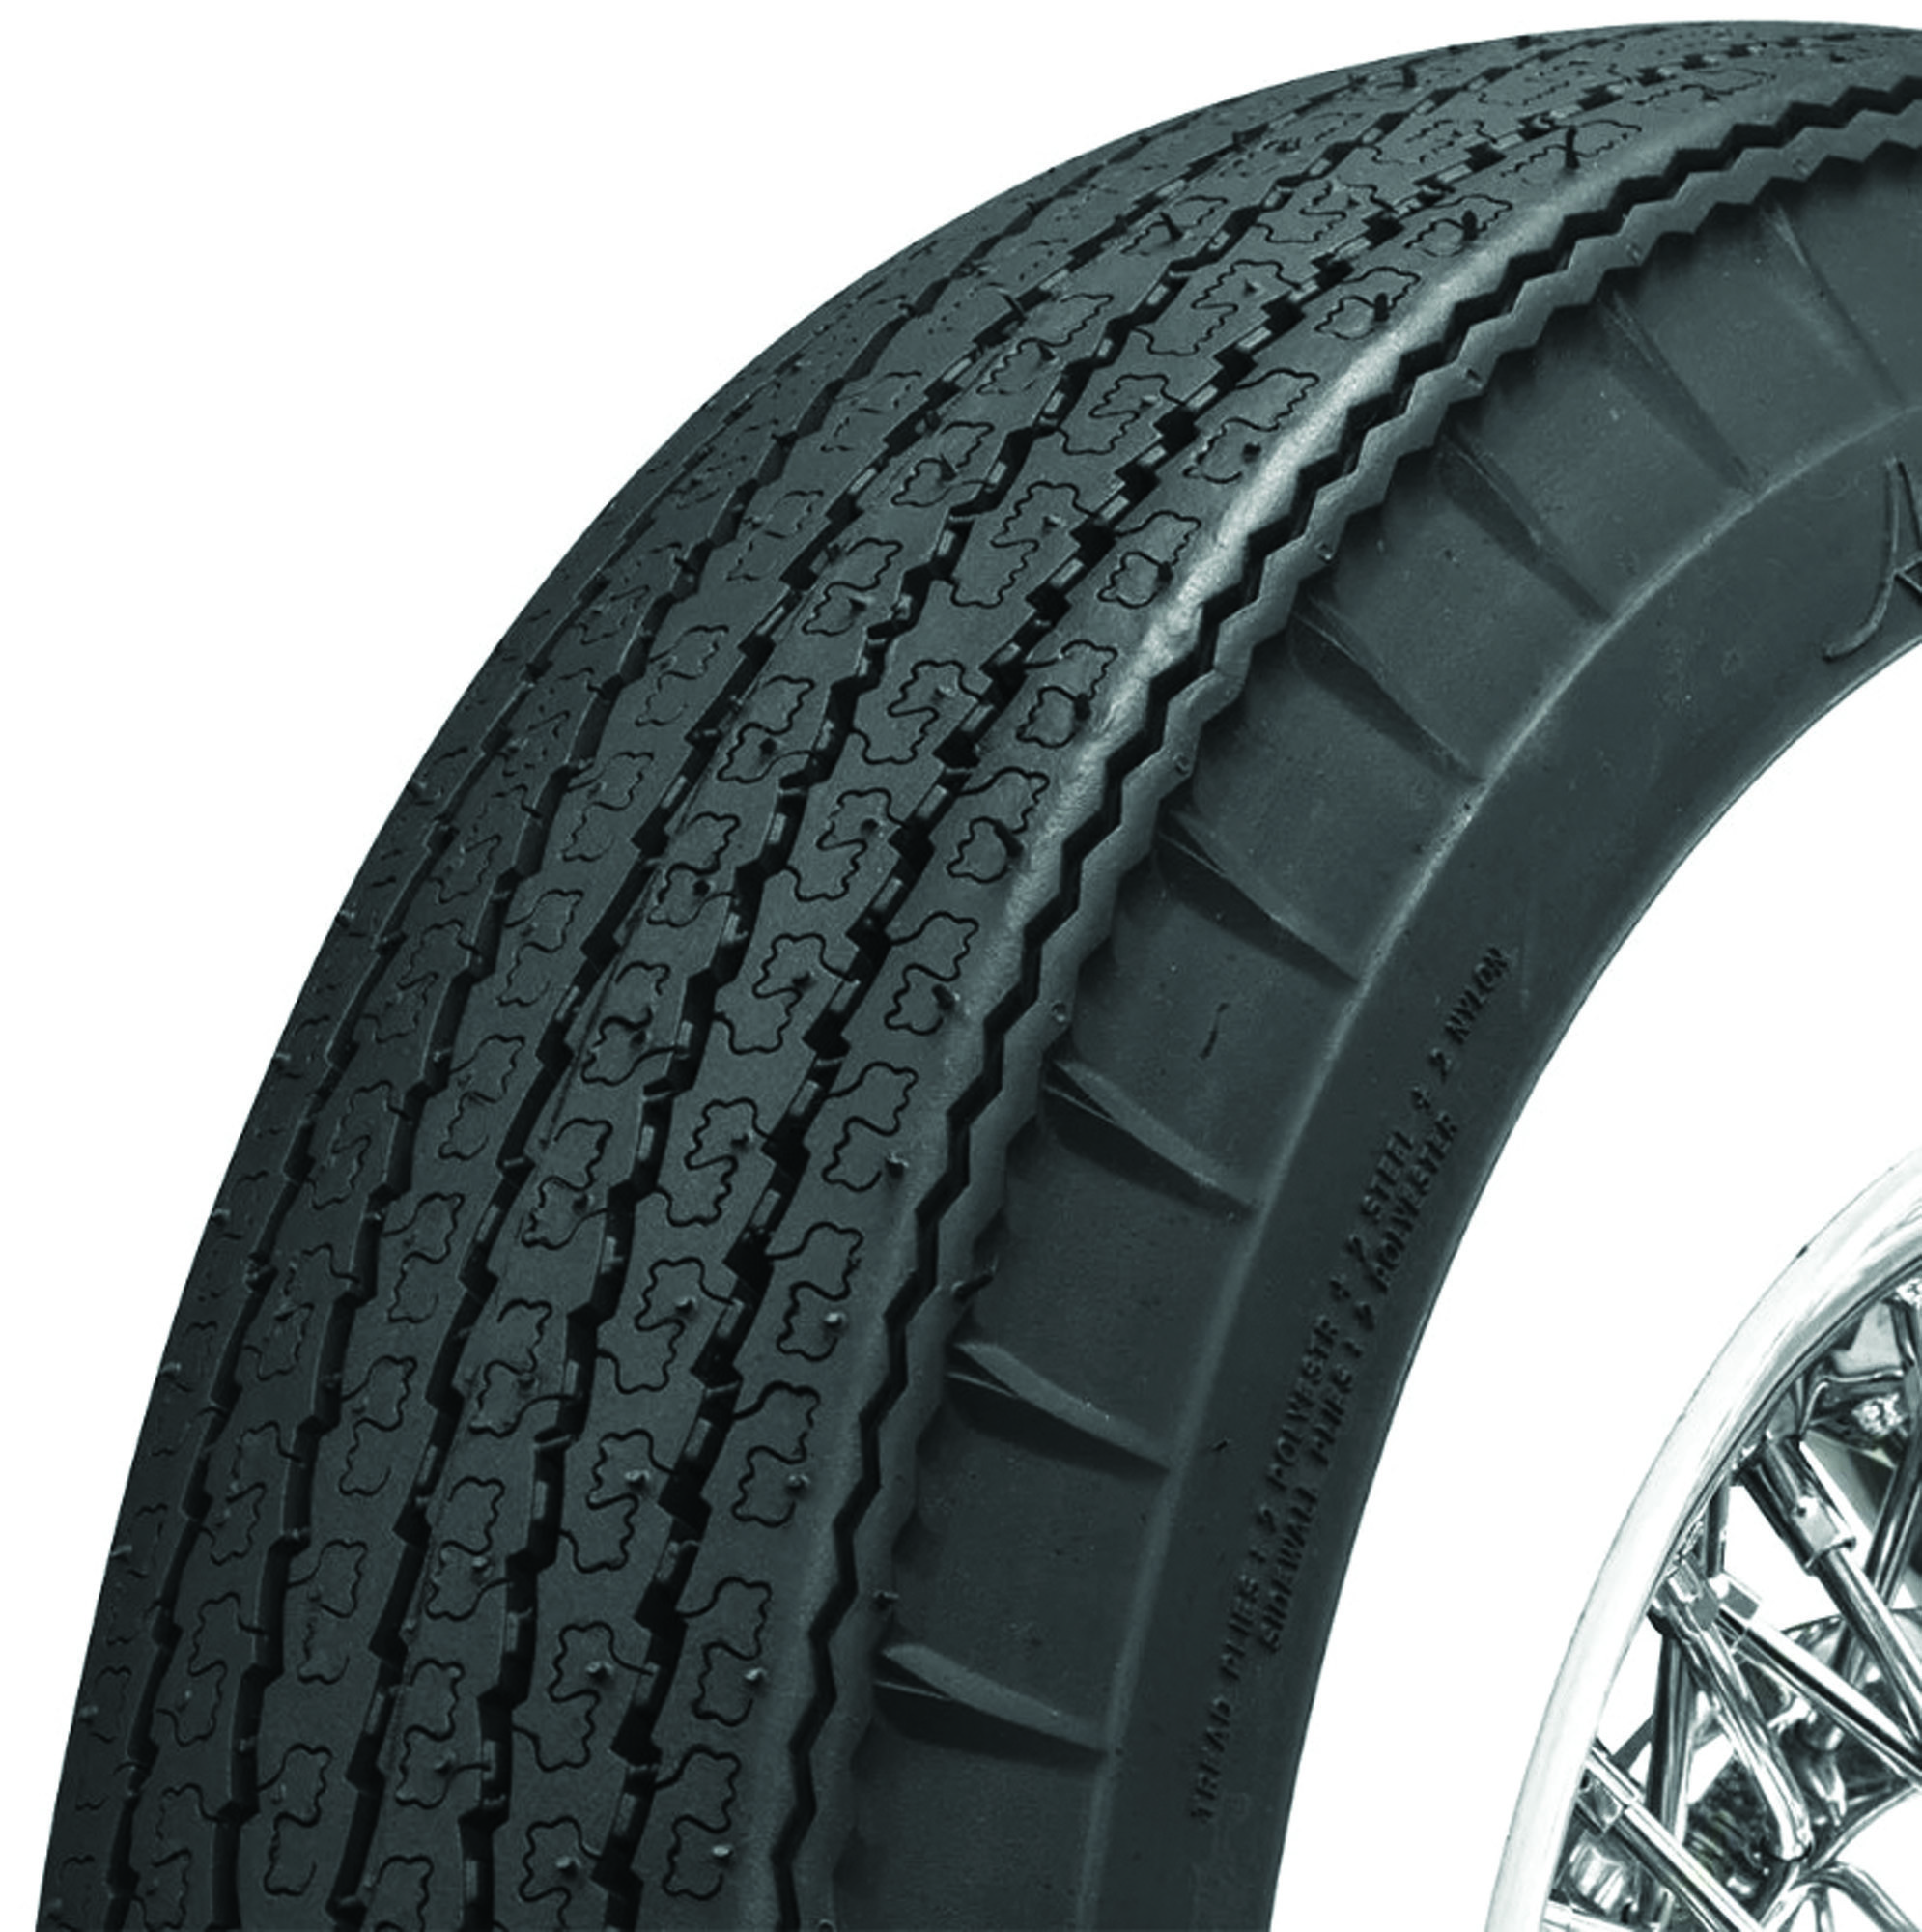 New Products For Your Classic: Radial Whitewall Tires And More